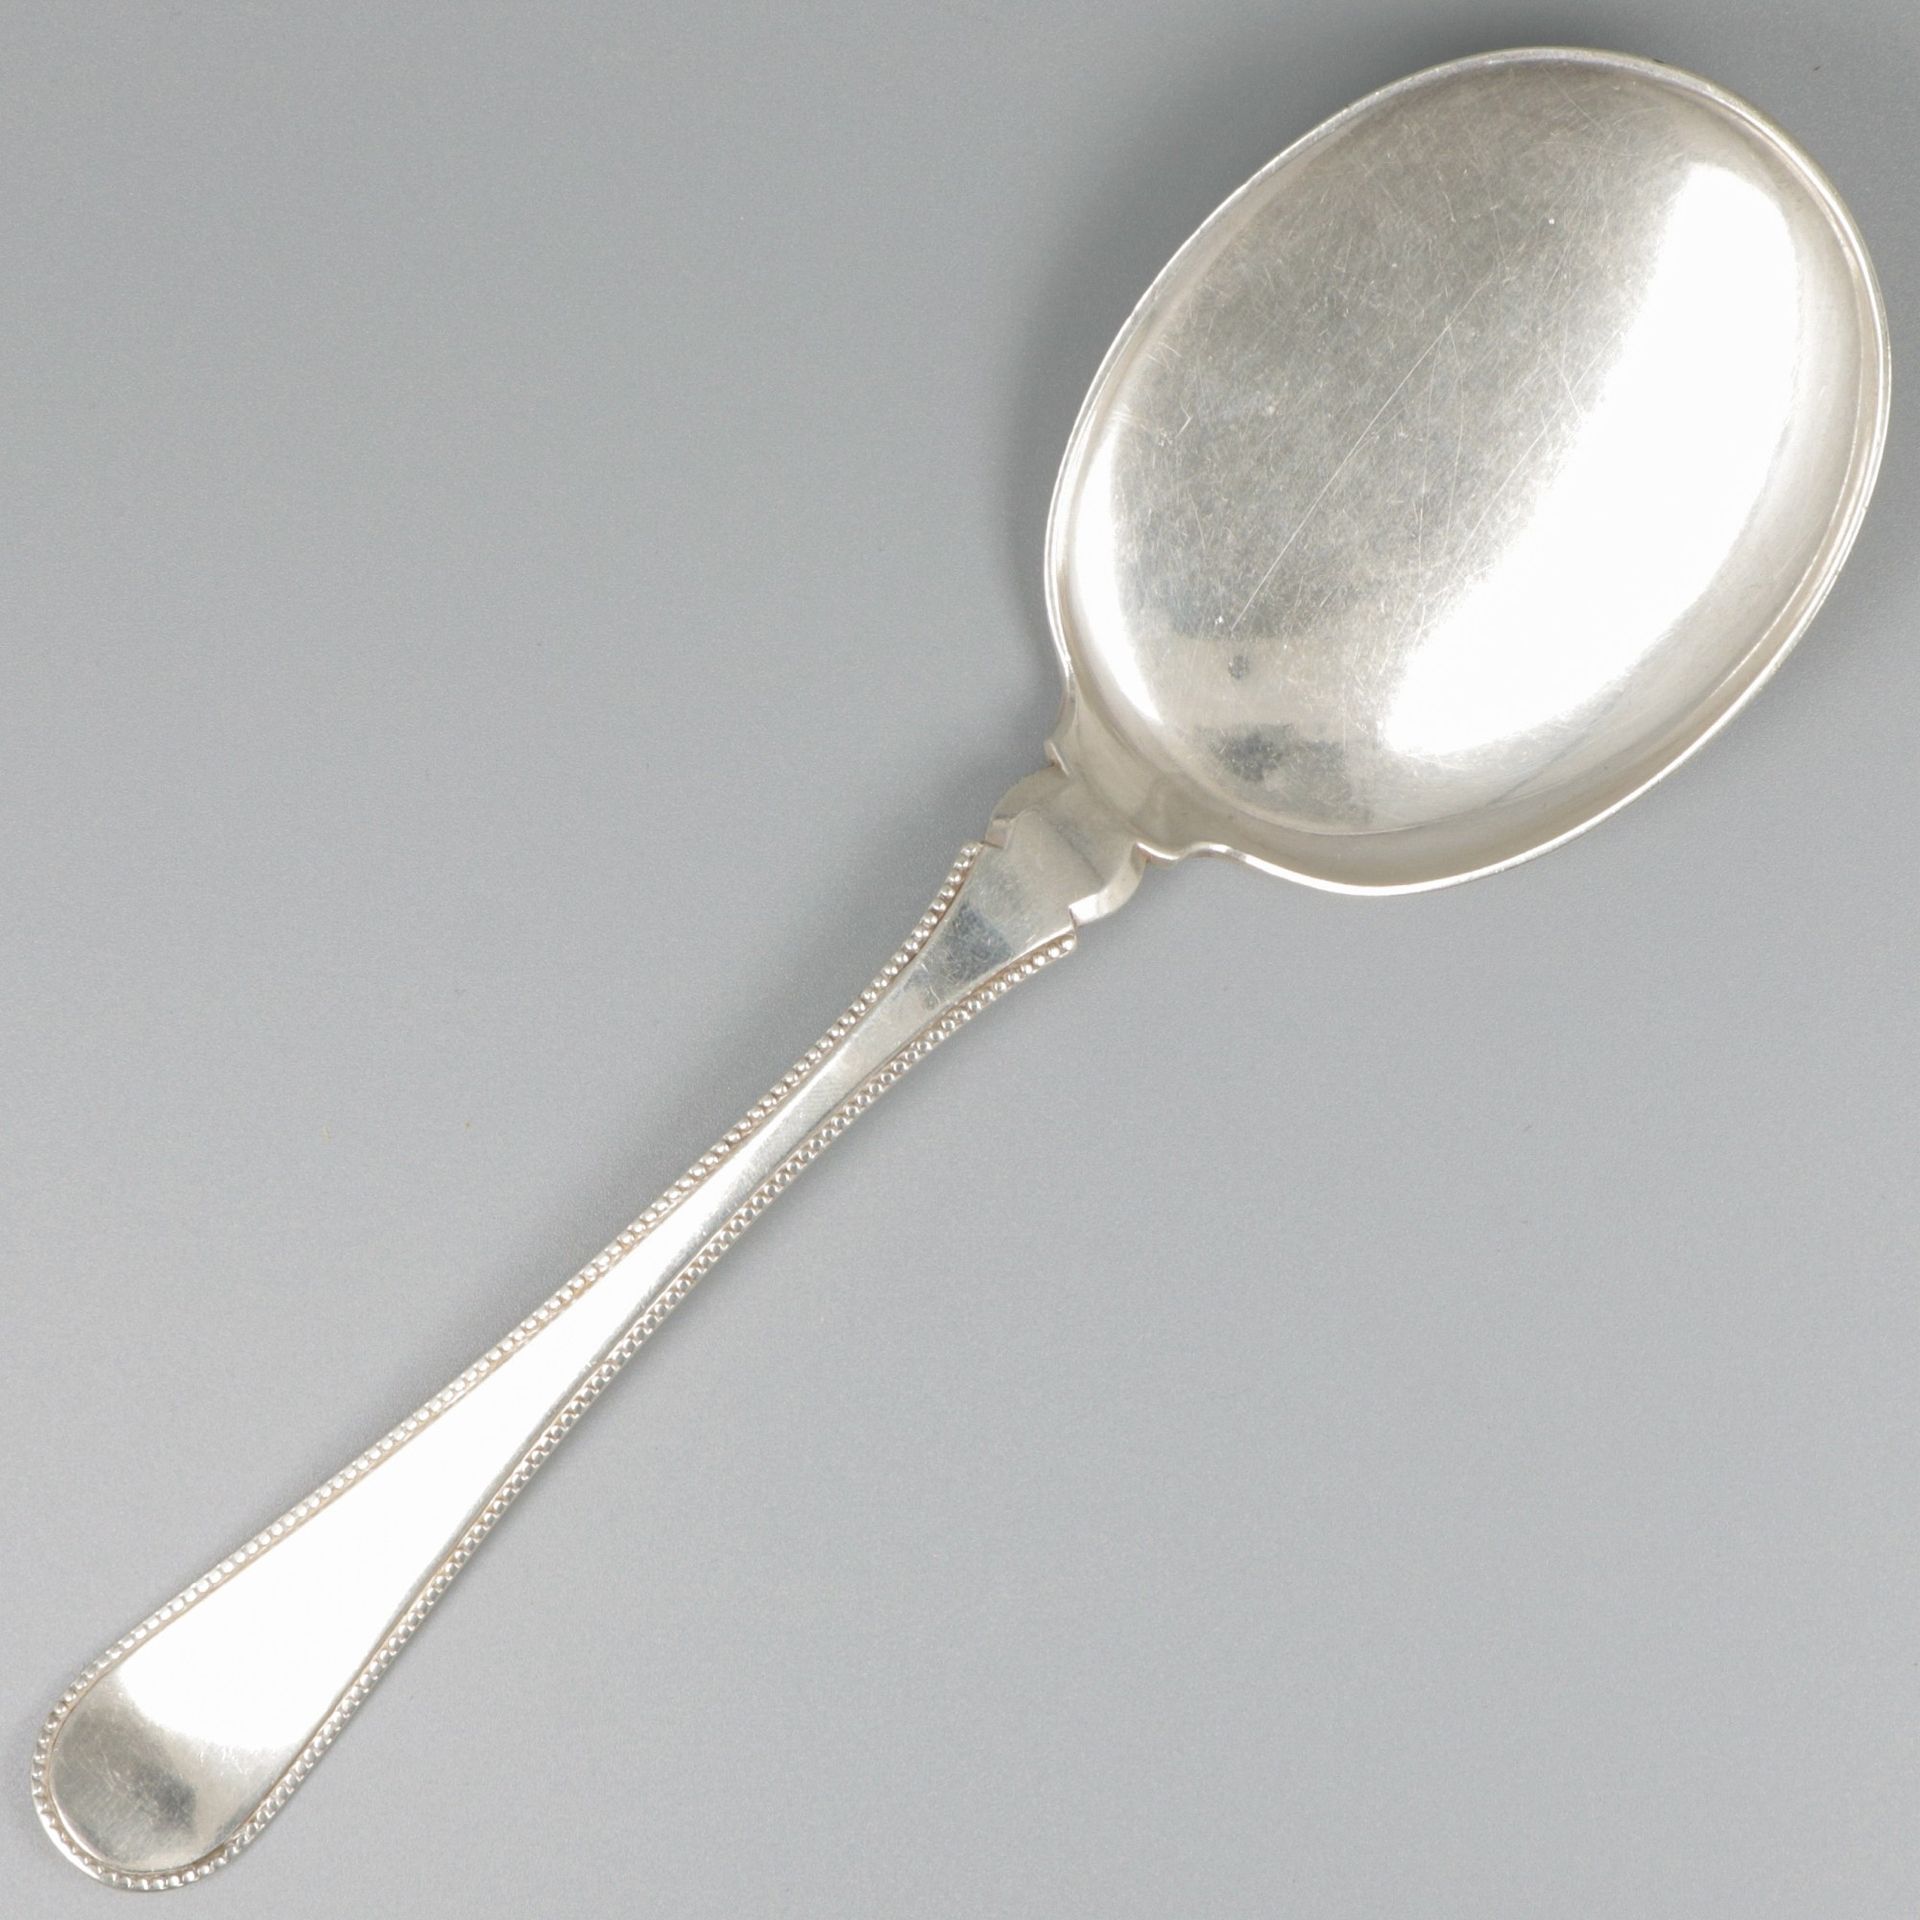 Ice cream scoop silver. Sleek design with pearl rim on the handle. The Netherlan&hellip;